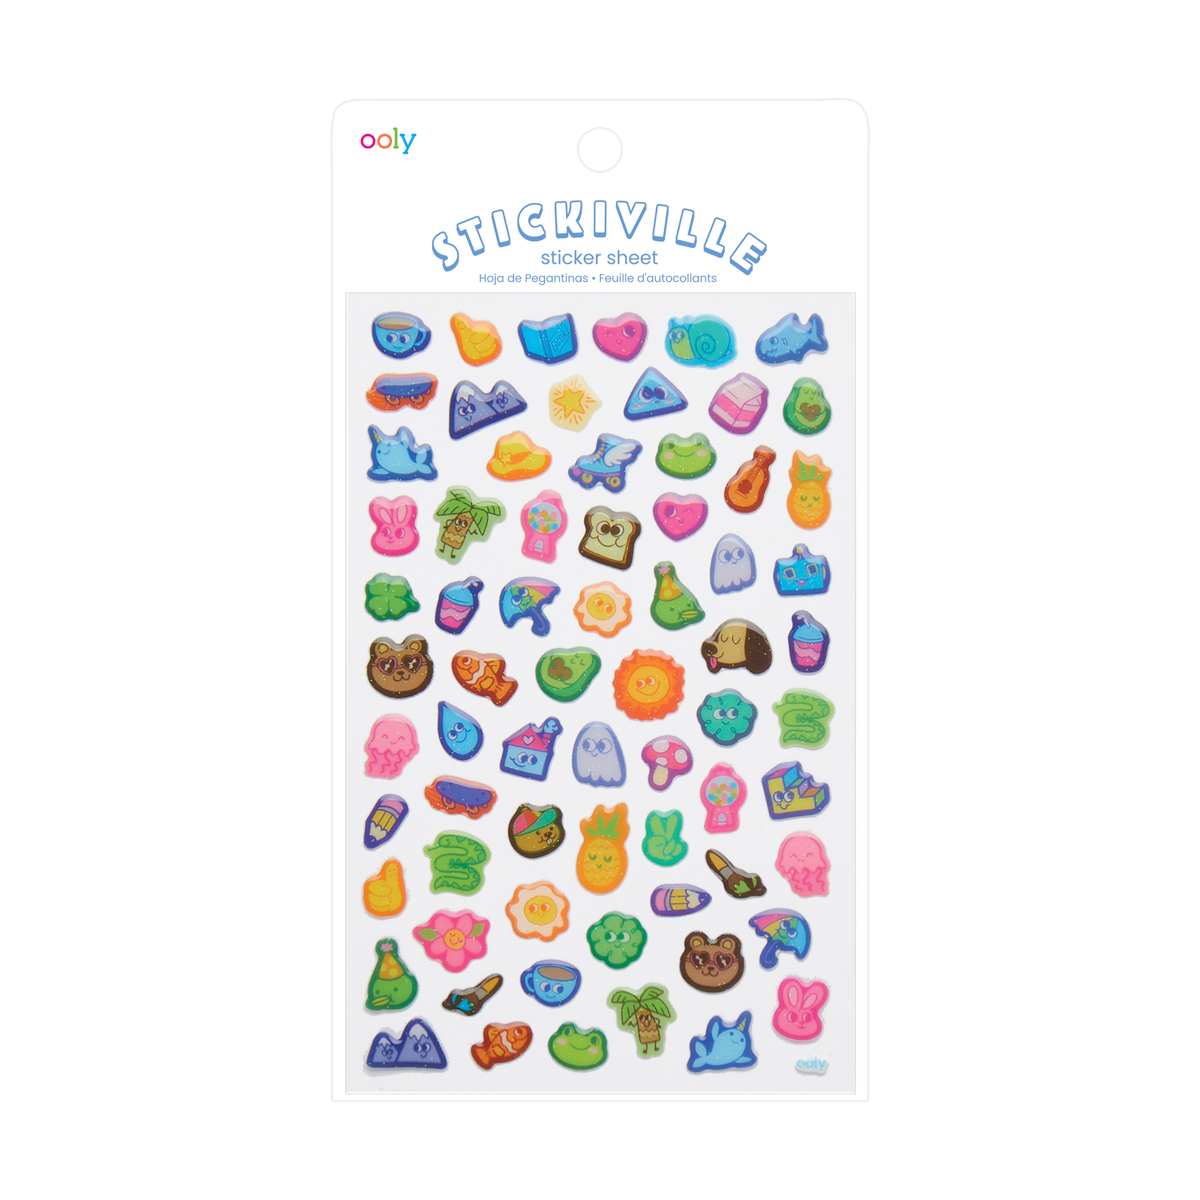 Stickiville Silly Doodles Stickers - OOLY